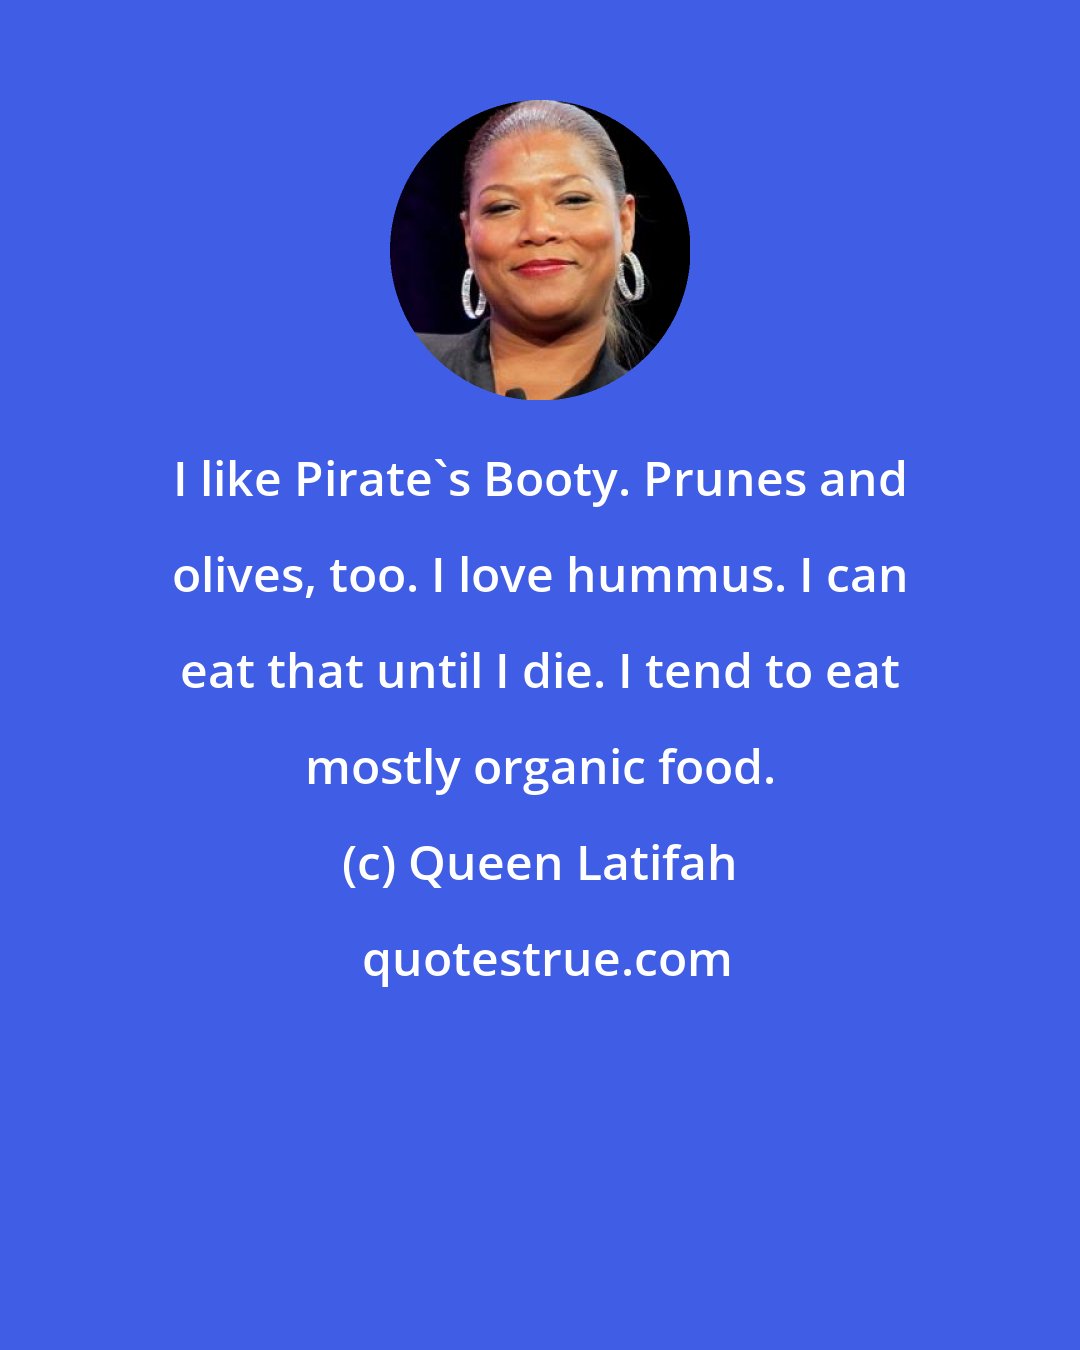 Queen Latifah: I like Pirate's Booty. Prunes and olives, too. I love hummus. I can eat that until I die. I tend to eat mostly organic food.